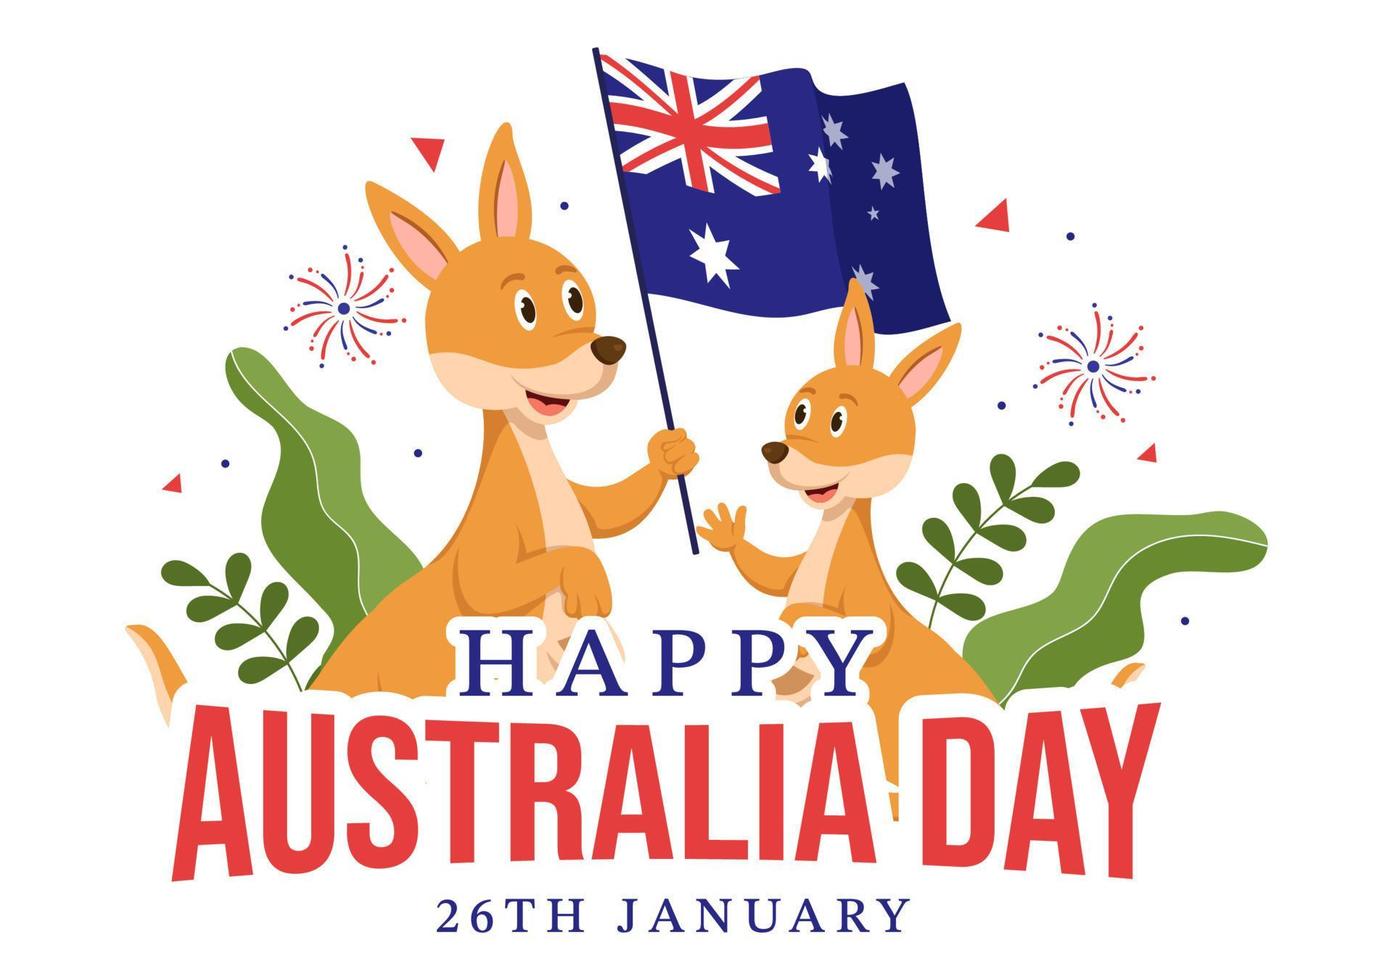 Happy Australia Day Observed Every Year on January 26th with Flags and Kangaroos in Flat Cartoon Hand Drawn Template Illustration vector